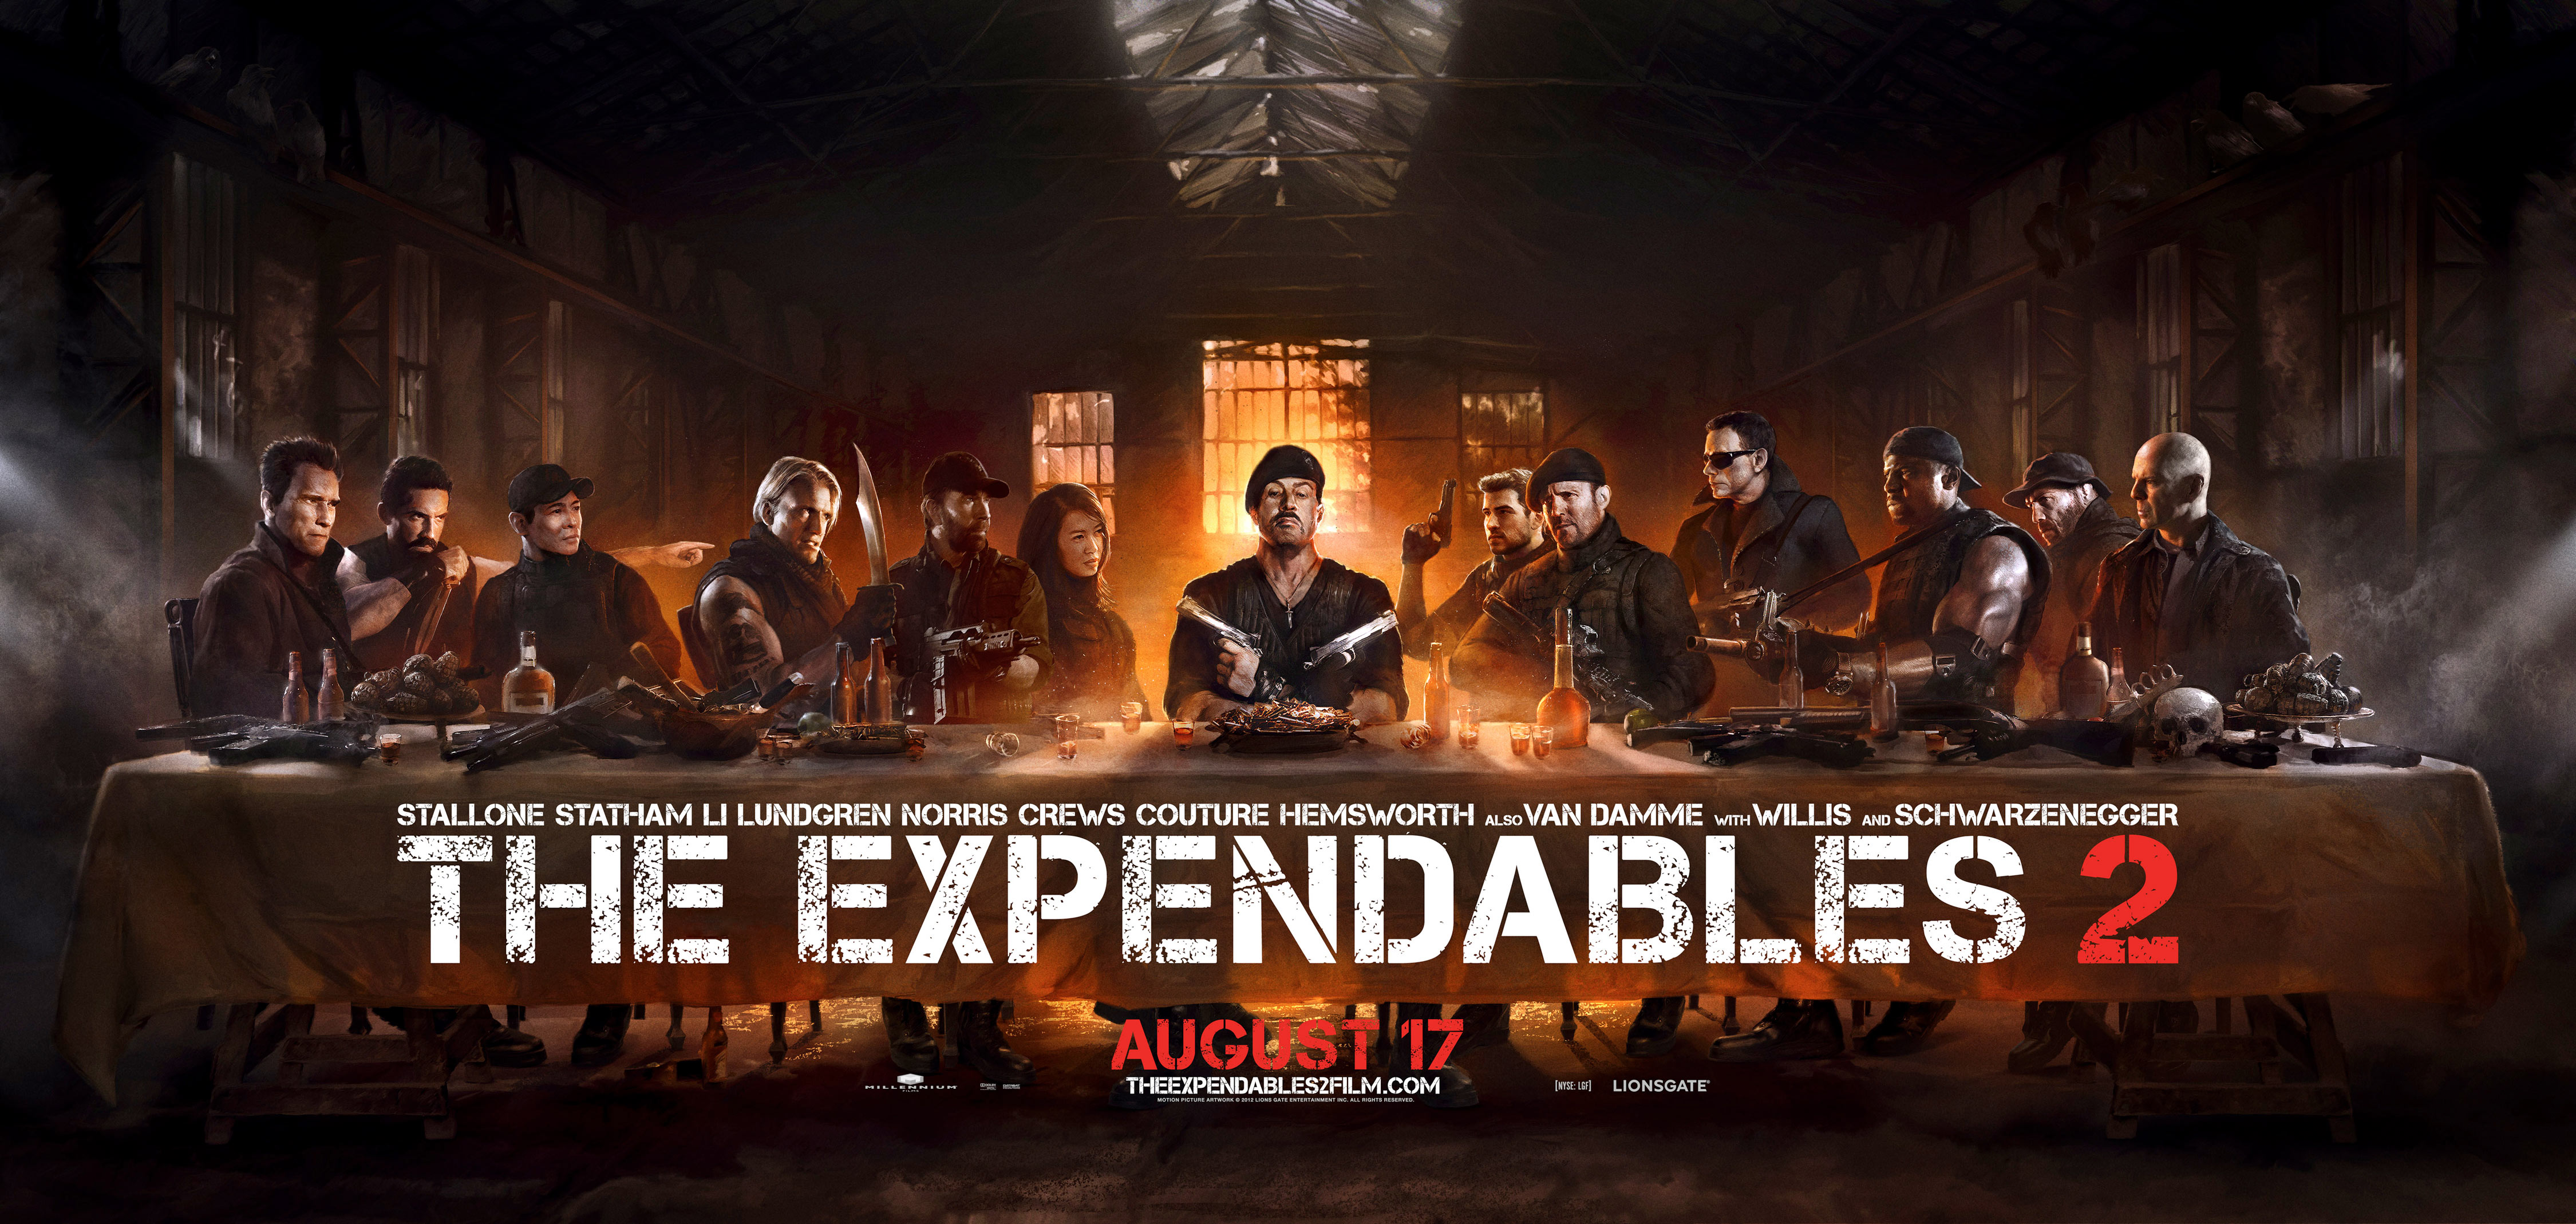 movie, the expendables 2, arnold schwarzenegger, barney ross, billy (the expendables), booker (the expendables), bruce willis, chuck norris, church (the expendables), dolph lundgren, gunnar jensen, hale caesar, jason statham, jean claude van damme, jet li, lee christmas, liam hemsworth, maggie (the expendables), nan yu, randy couture, sylvester stallone, terry crews, toll road, trench (the expendables), vilain (the expendables), yin yang (the expendables), the expendables High Definition image